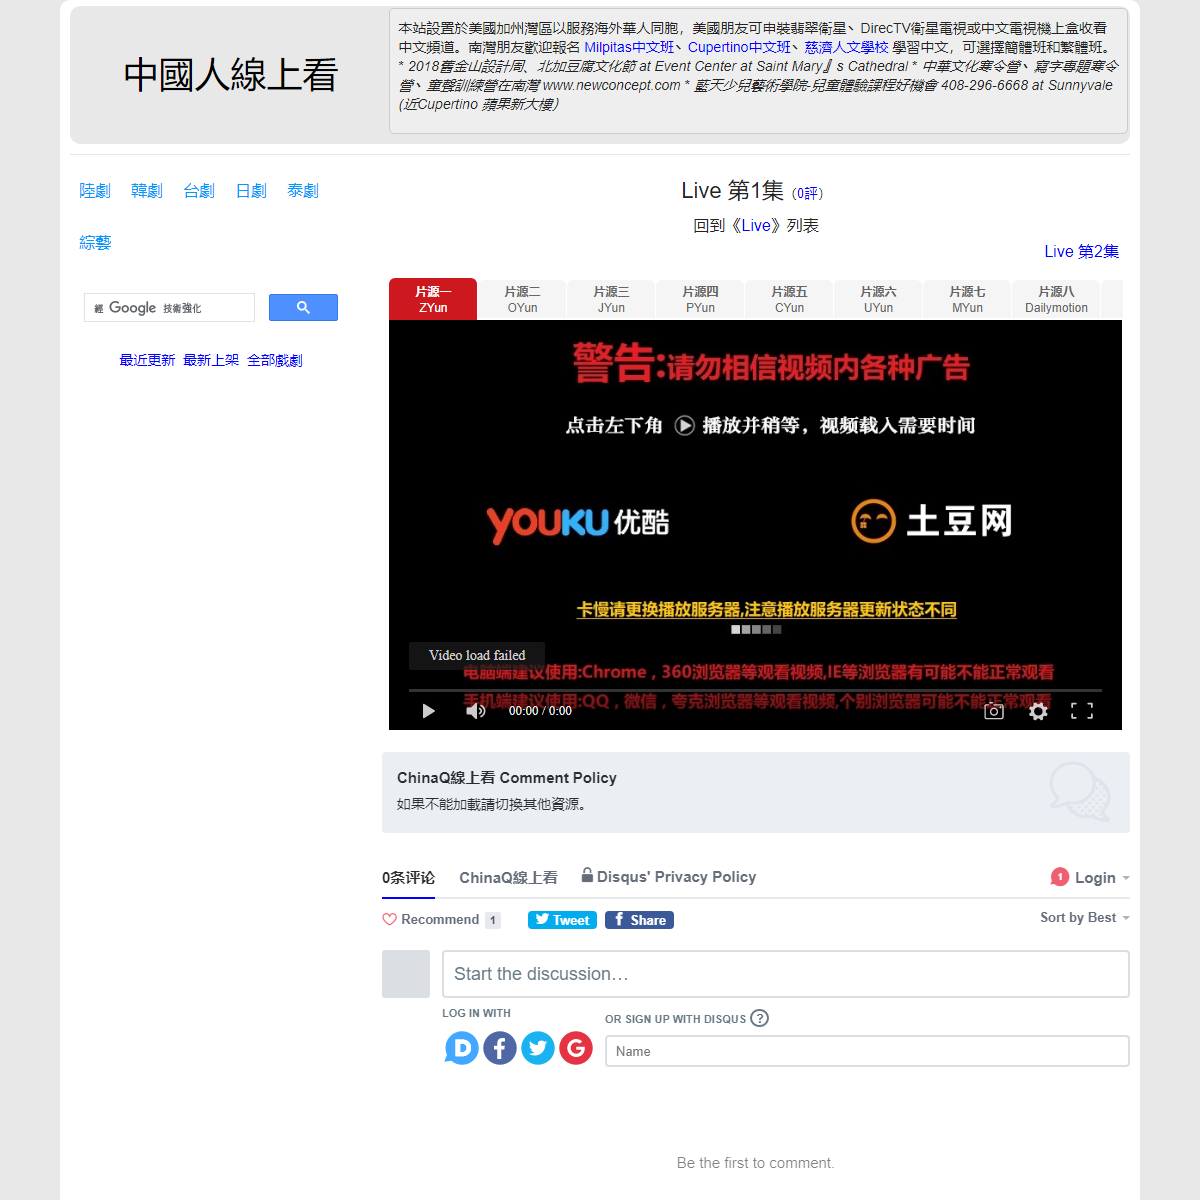 A complete backup of https://chinaq.tv/kr180310/1.html